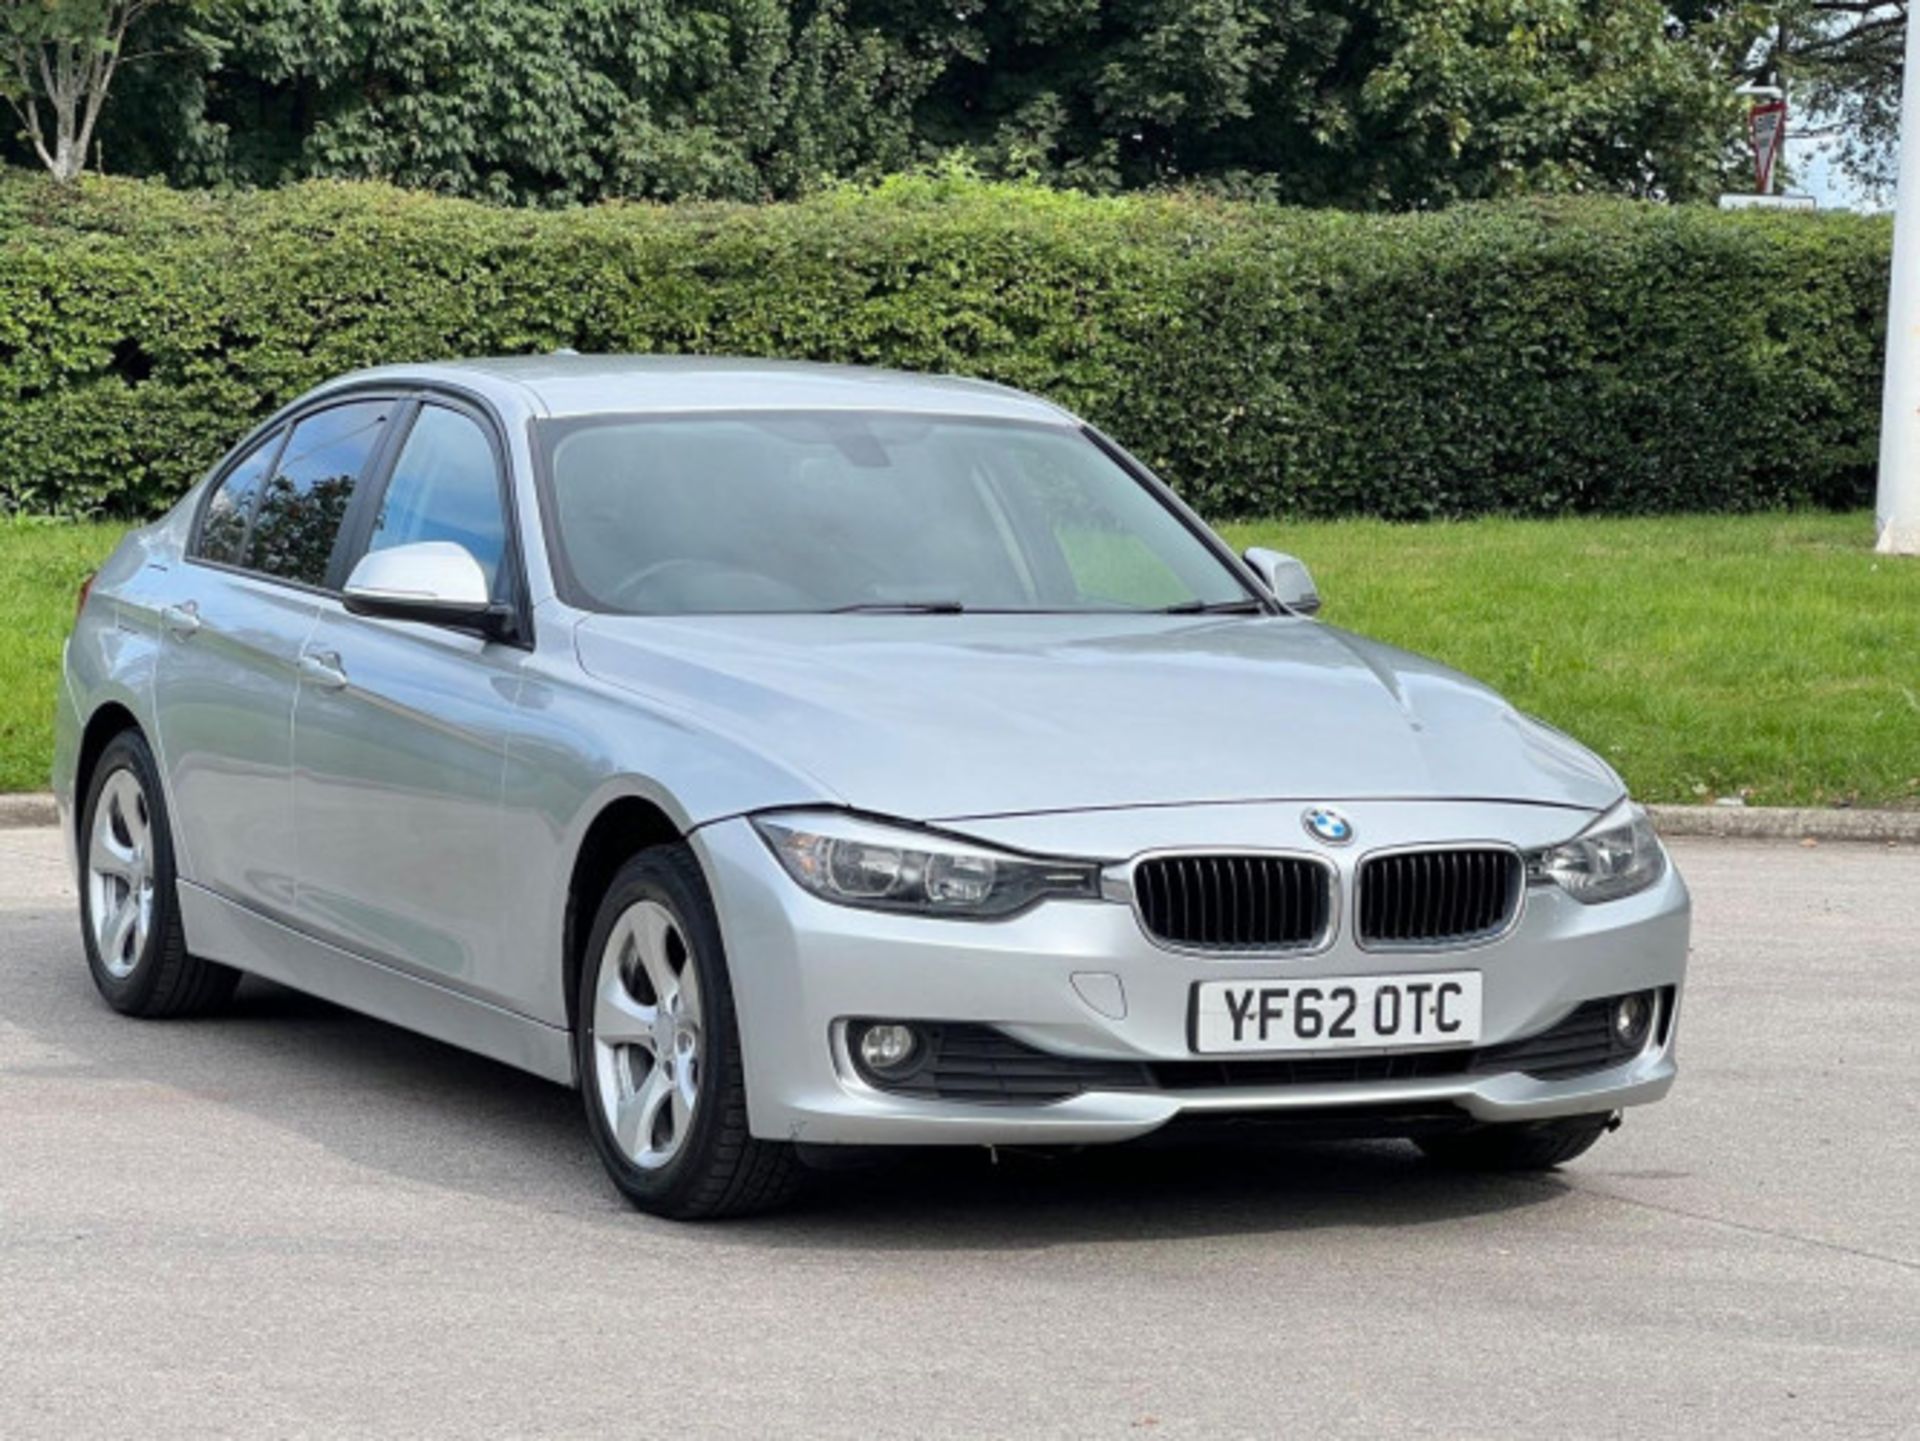 BMW 3 SERIES 2.0 DIESEL ED START STOP - A WELL-MAINTAINED GEM >>--NO VAT ON HAMMER--<< - Image 9 of 229